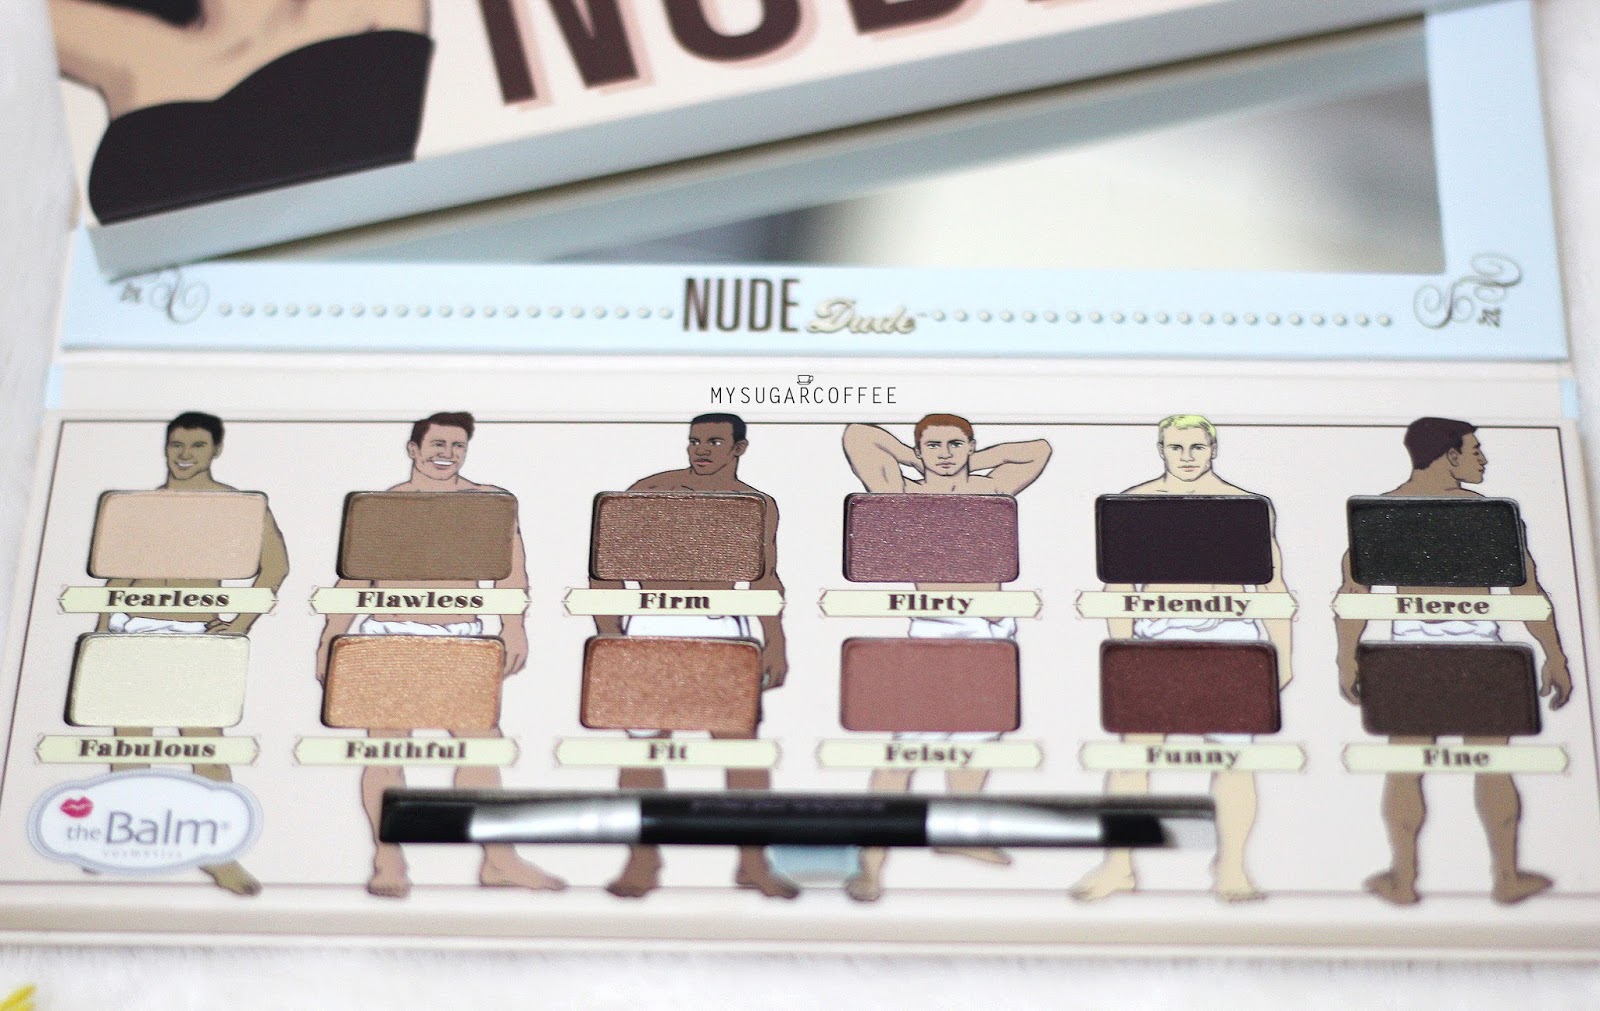 Review: theBalm Nude Tude Palette - From Head To Toe